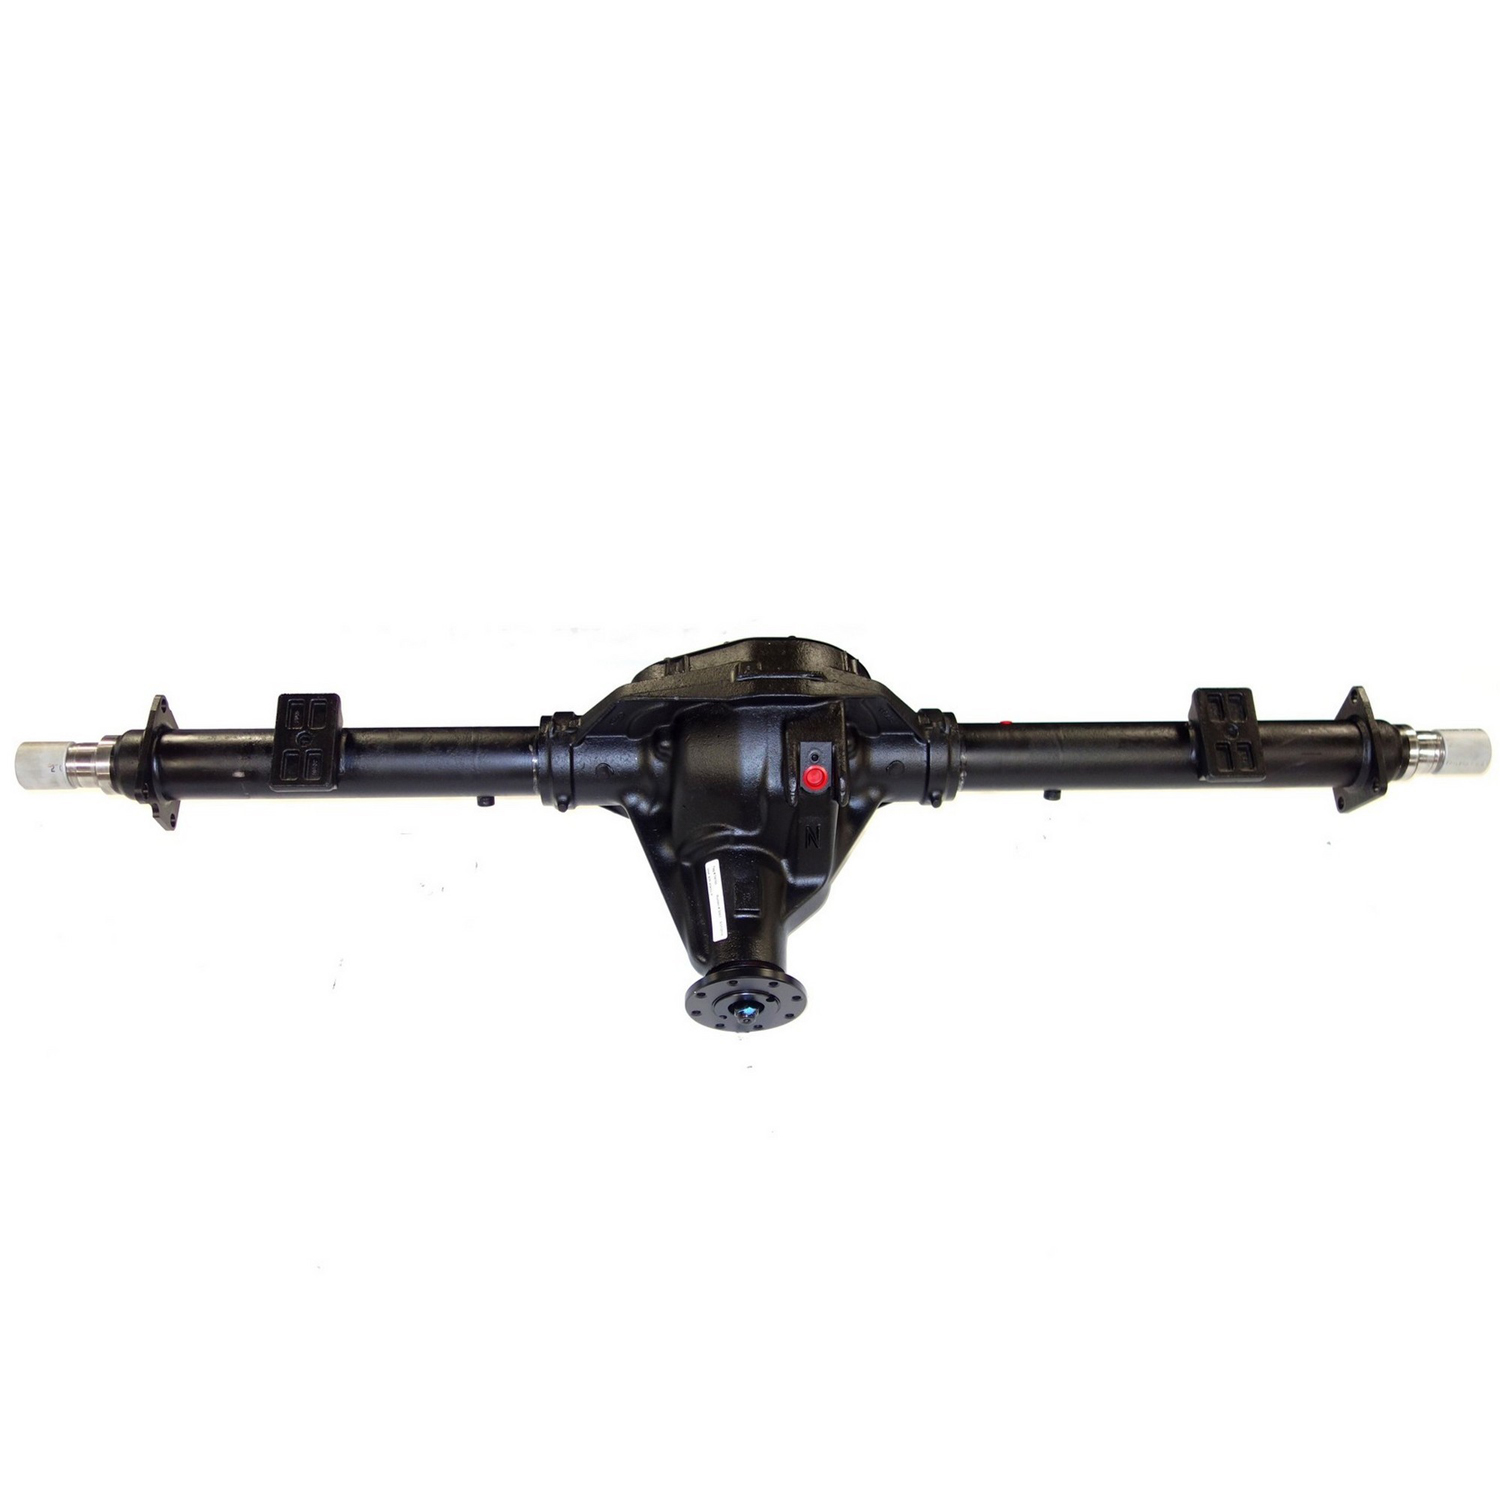 Remanufactured Complete Axle Assy for 10.5" 08-10 F250 & F350, 5.4l, 3.73 , SRW, Posi LSD